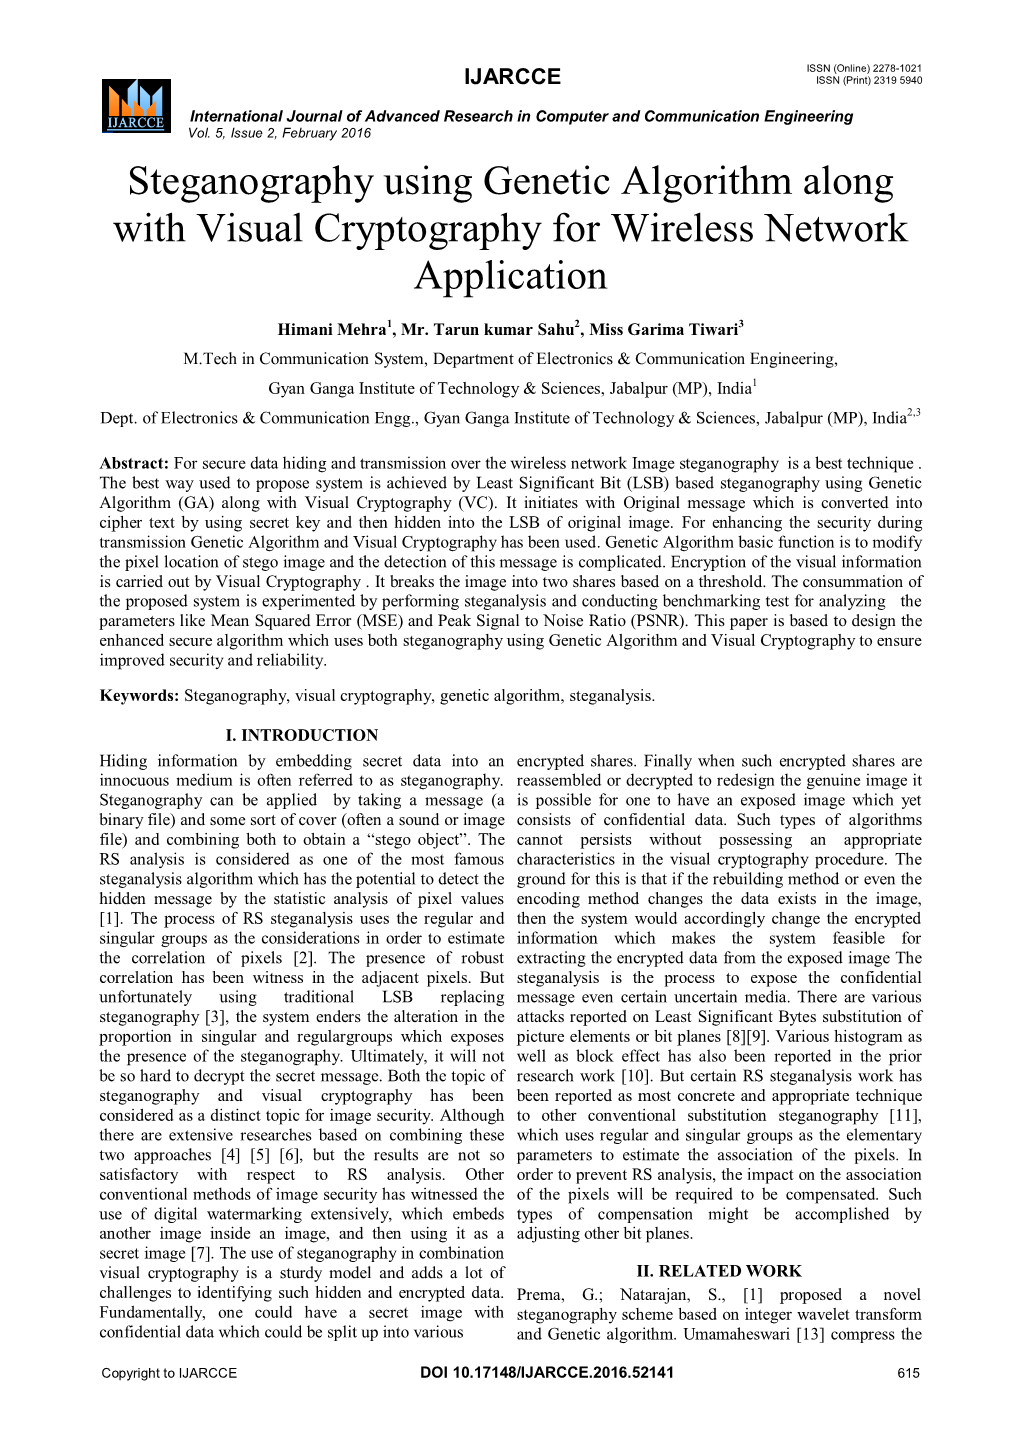 Steganography Using Genetic Algorithm Along with Visual Cryptography for Wireless Network Application